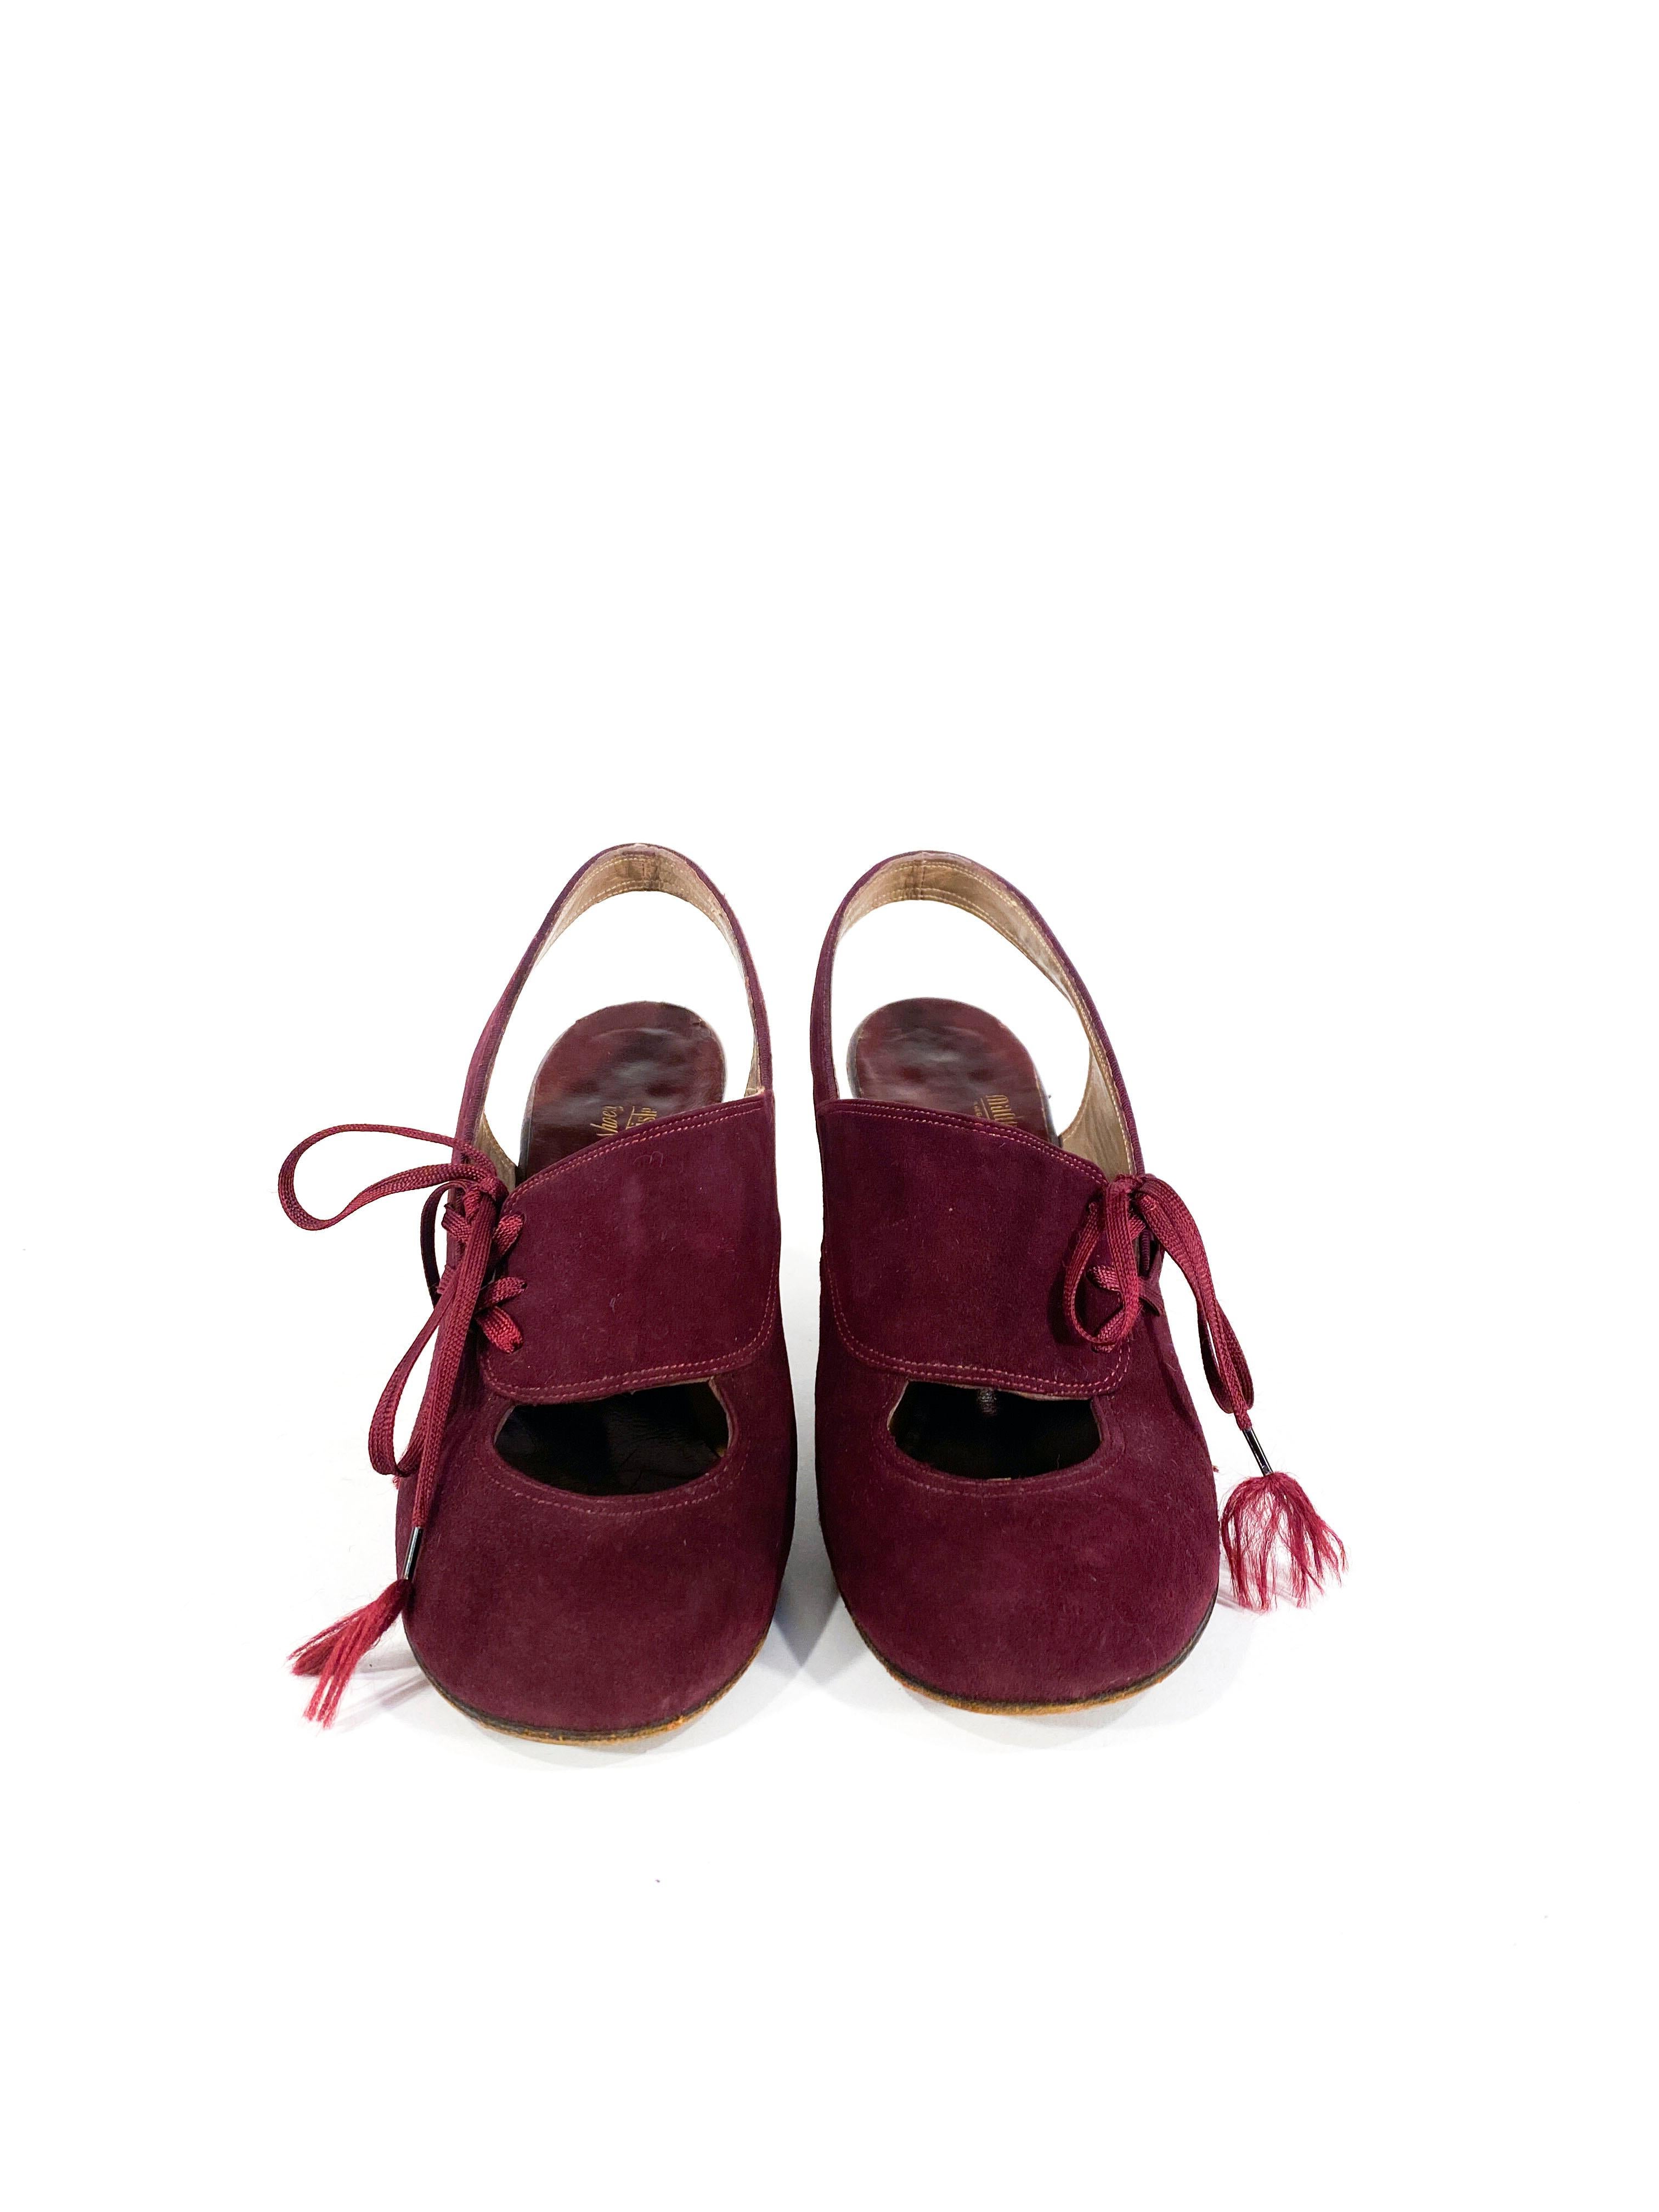 1930s Maroon suede sling-back round-toe heels with topstitching, a large cut out accent above the toes, and a laced adjustment to tighten the top of the vamp. The laces are original with steel aglets and the heels are 3.25 inches tall. 